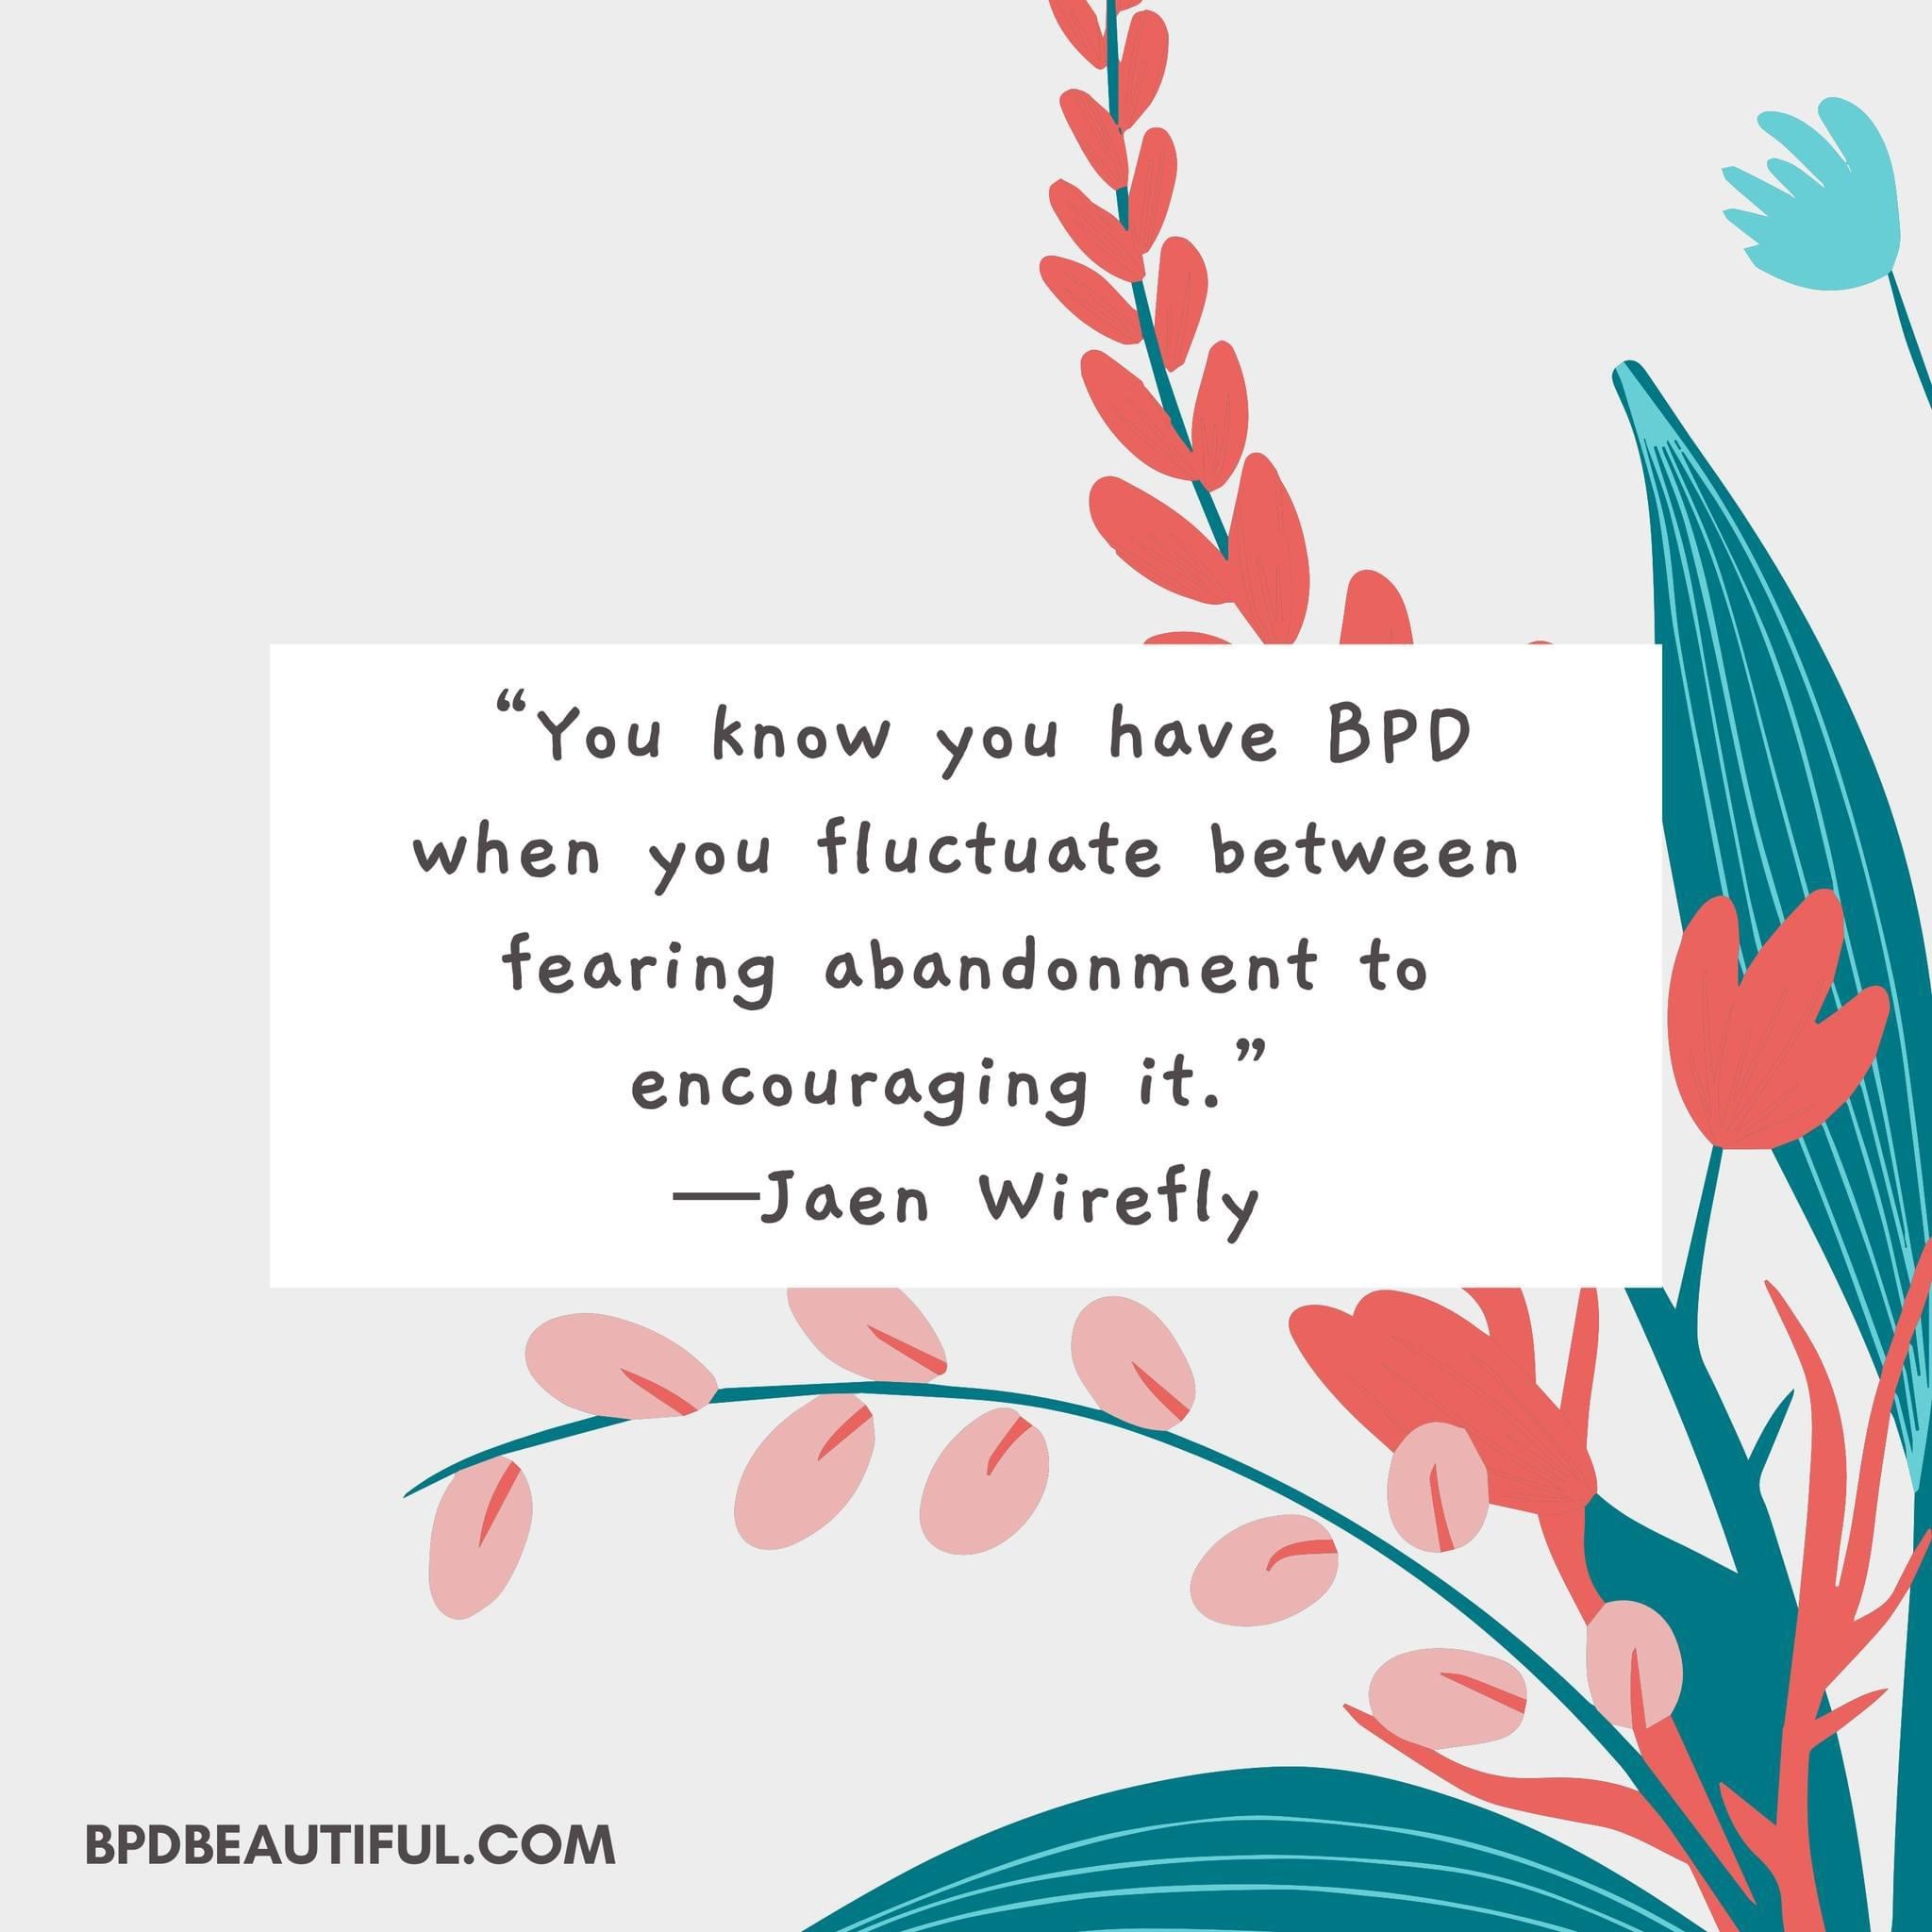 bpd quotes: you know you have BPD when you fluctuate between fearing abandonment and encouraging it. graphic from bpd beautiful's instagram.